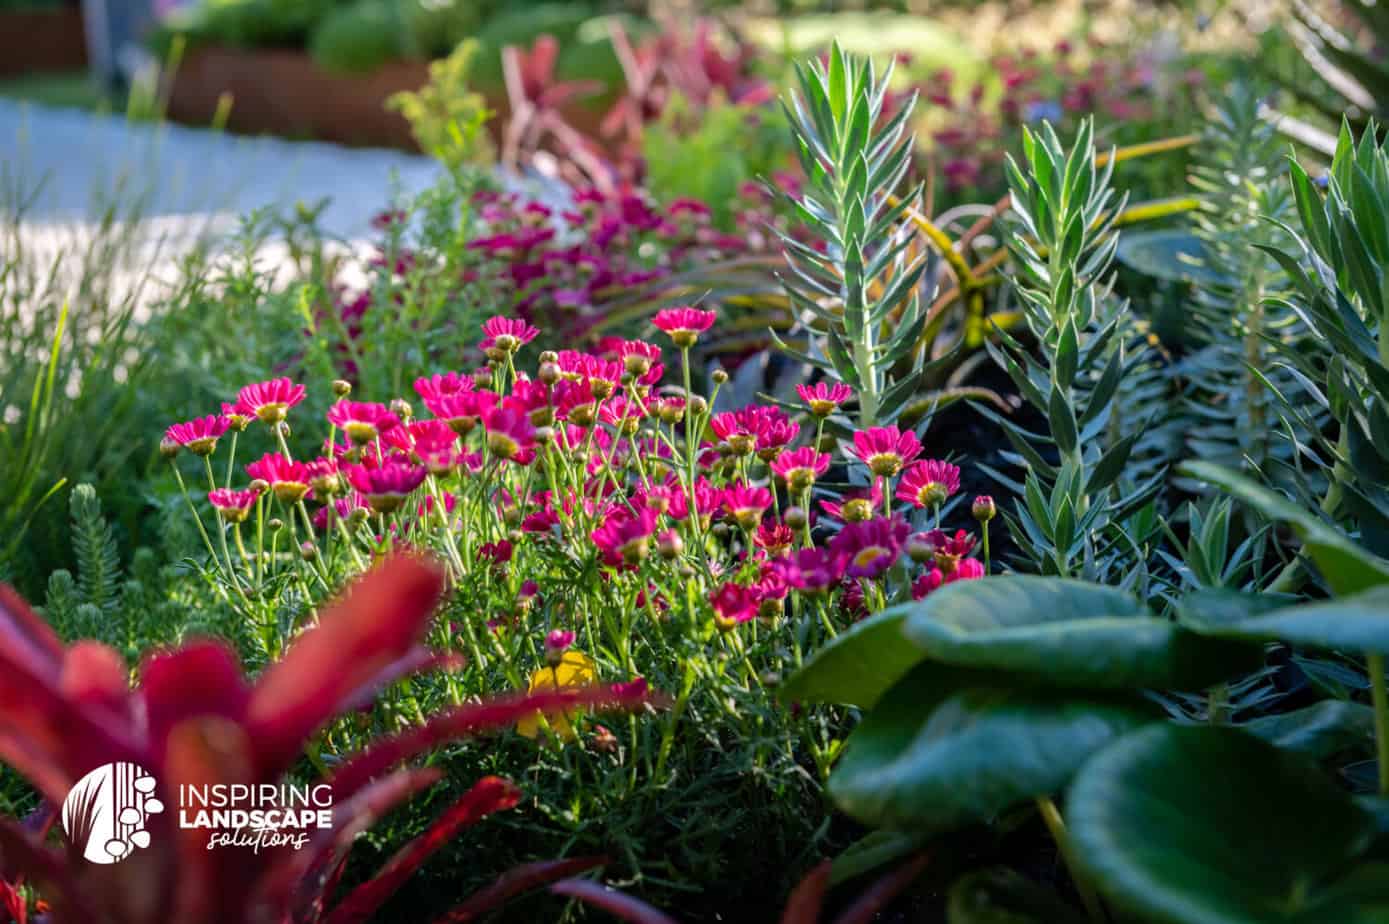 Red neoregelia feature bromeliad and red daisies in planting design